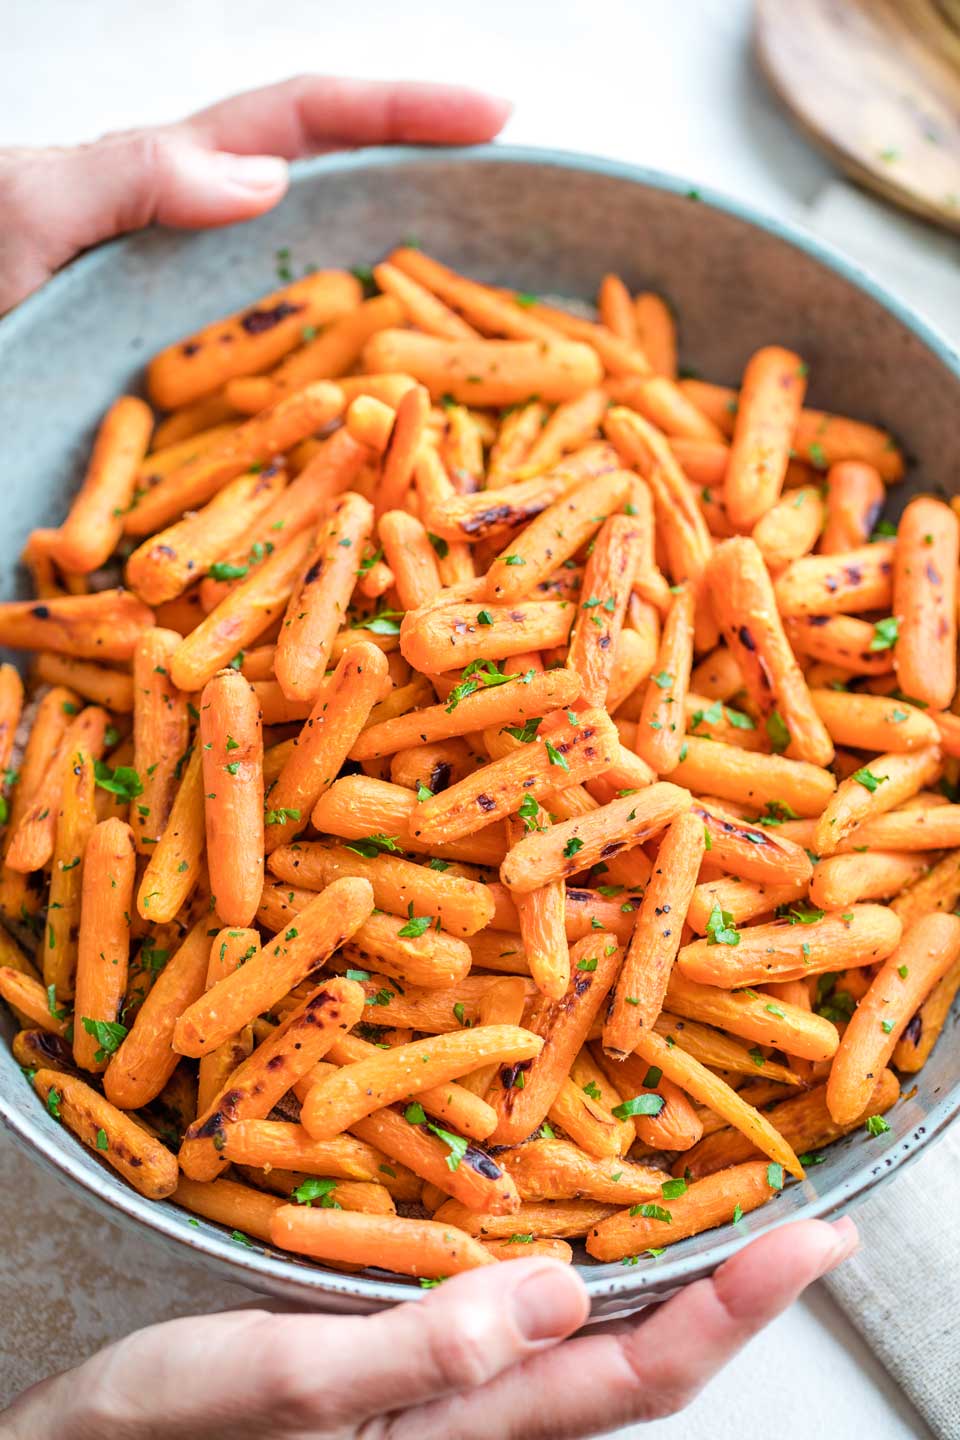 Overhead of two hands holding a blue serving bowl piled with roasted carrots that are fresh from the oven, ready to serve with a light sprinkling of fresh parsley.